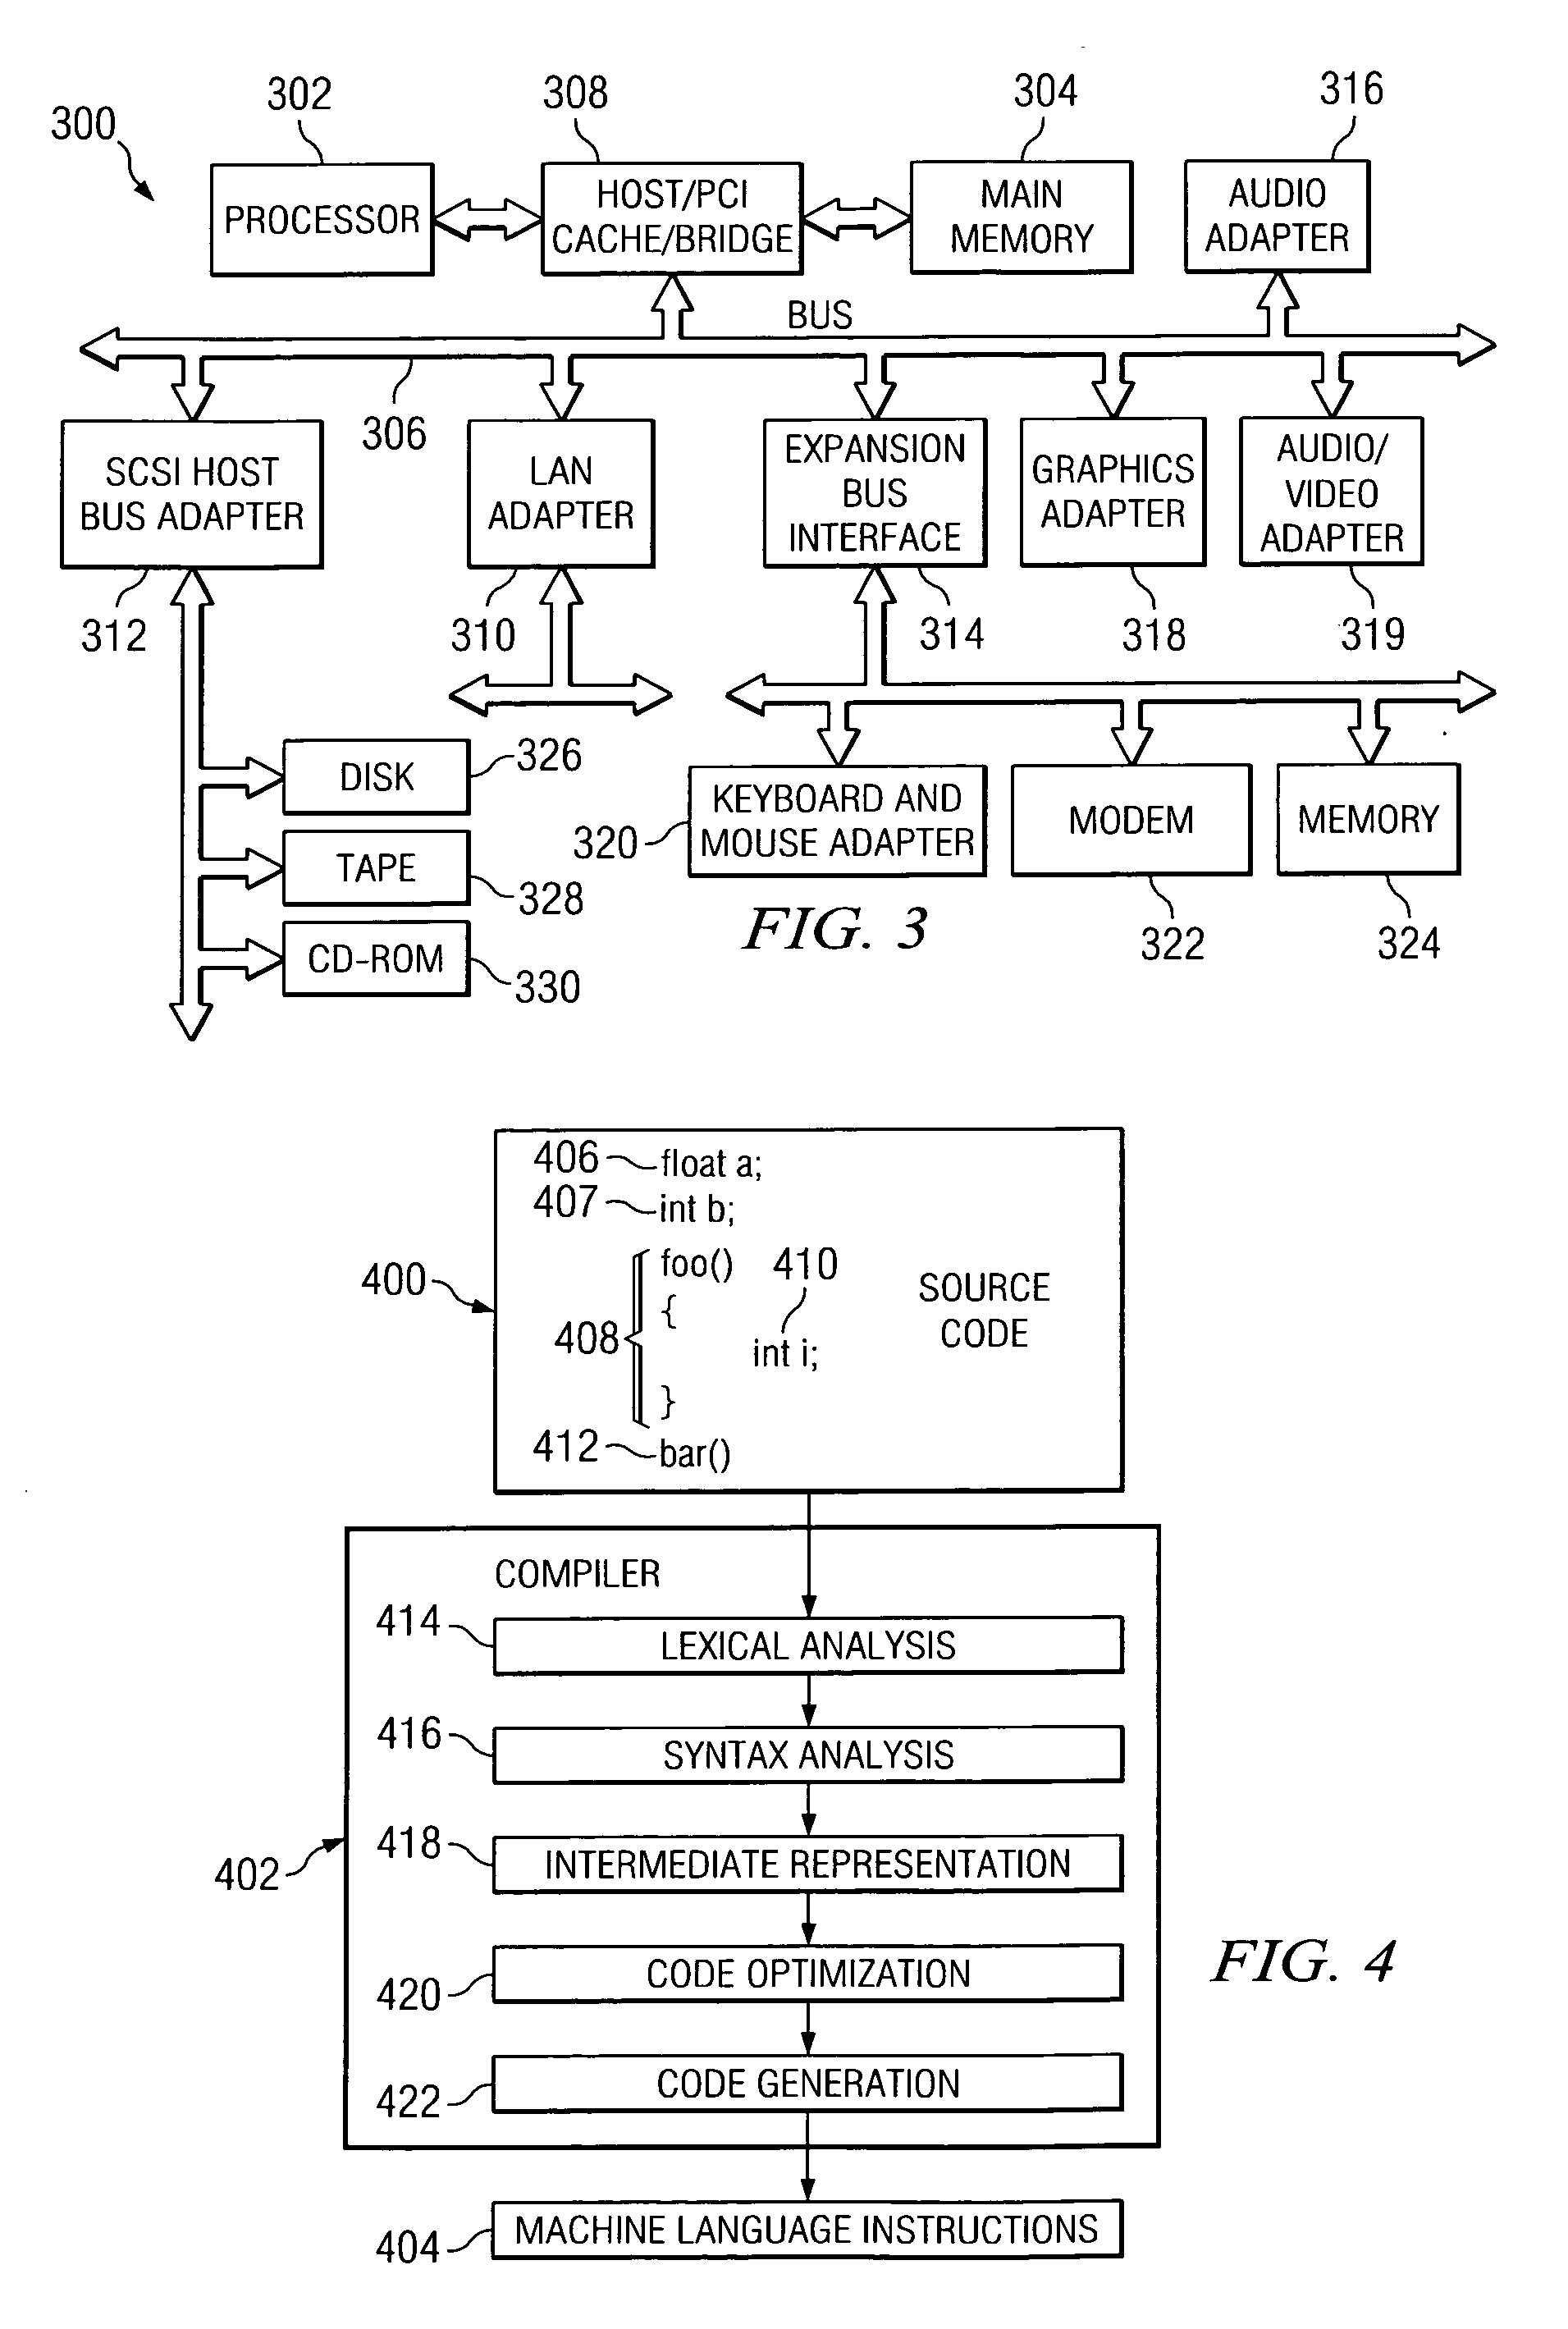 Method and apparatus for improving data cache performance using inter-procedural strength reduction of global objects